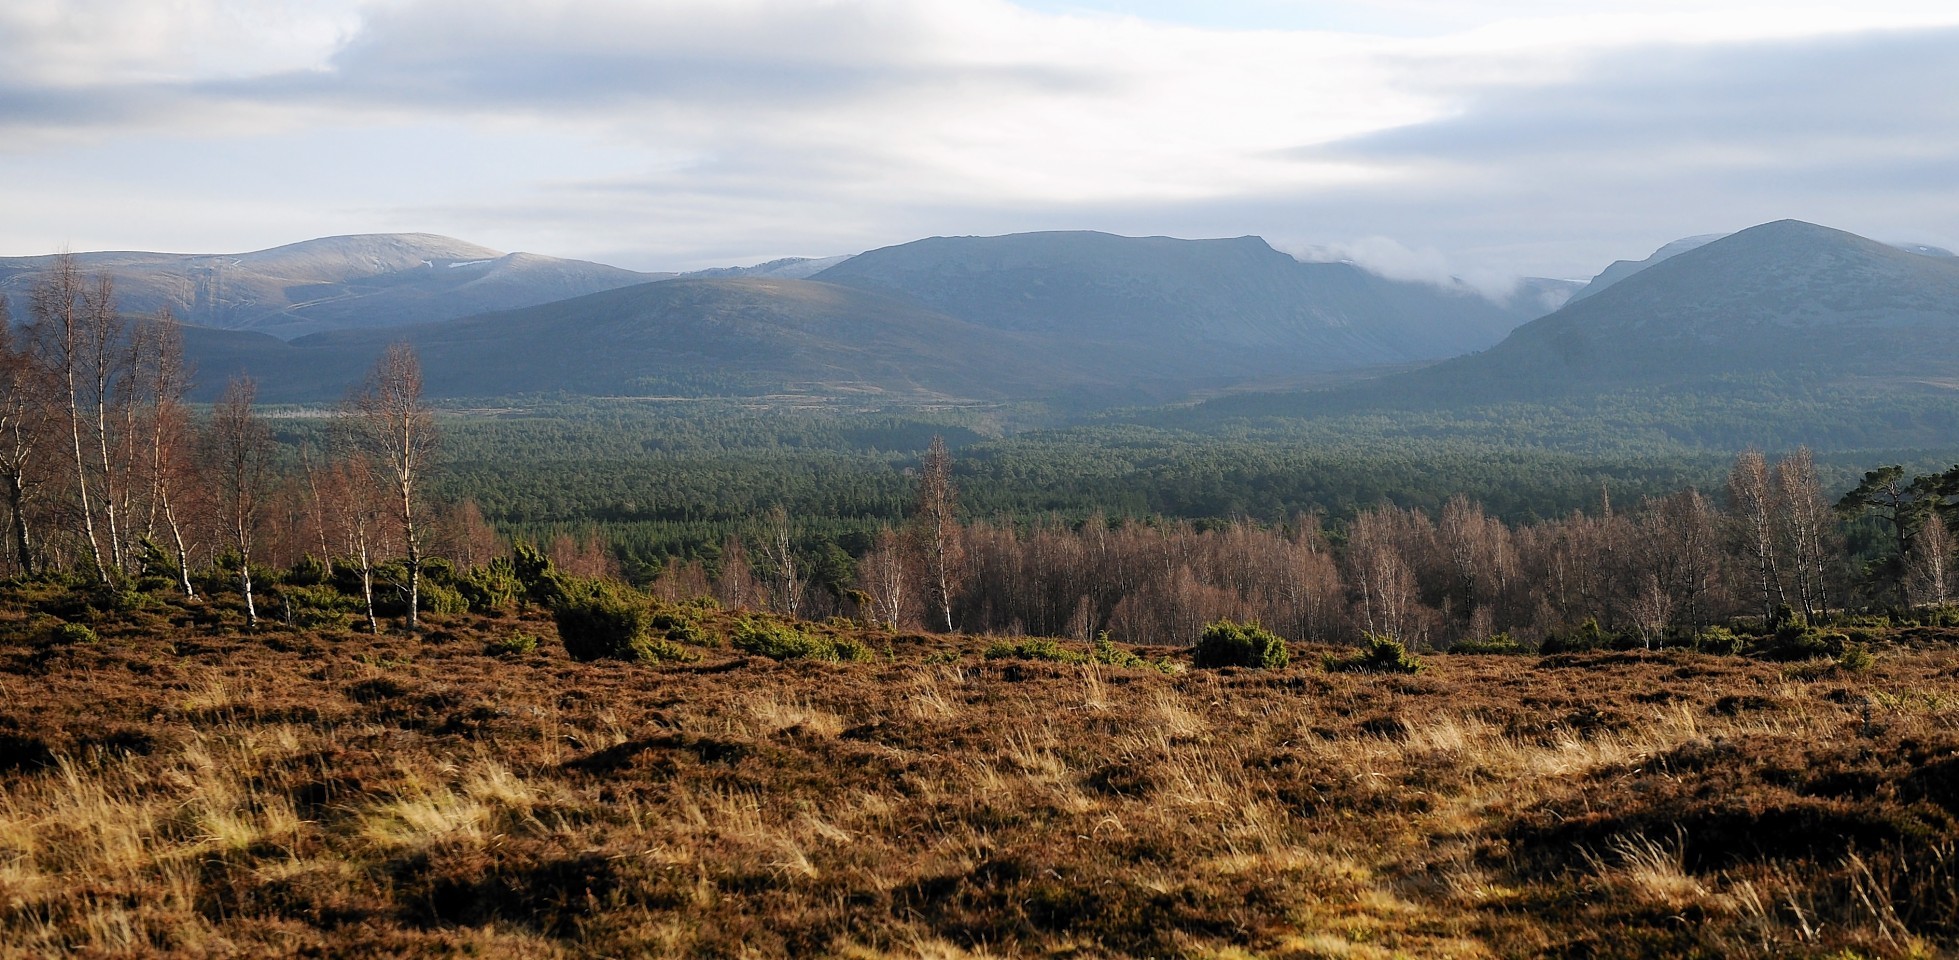 The climber died after a fall in the Cairngorms